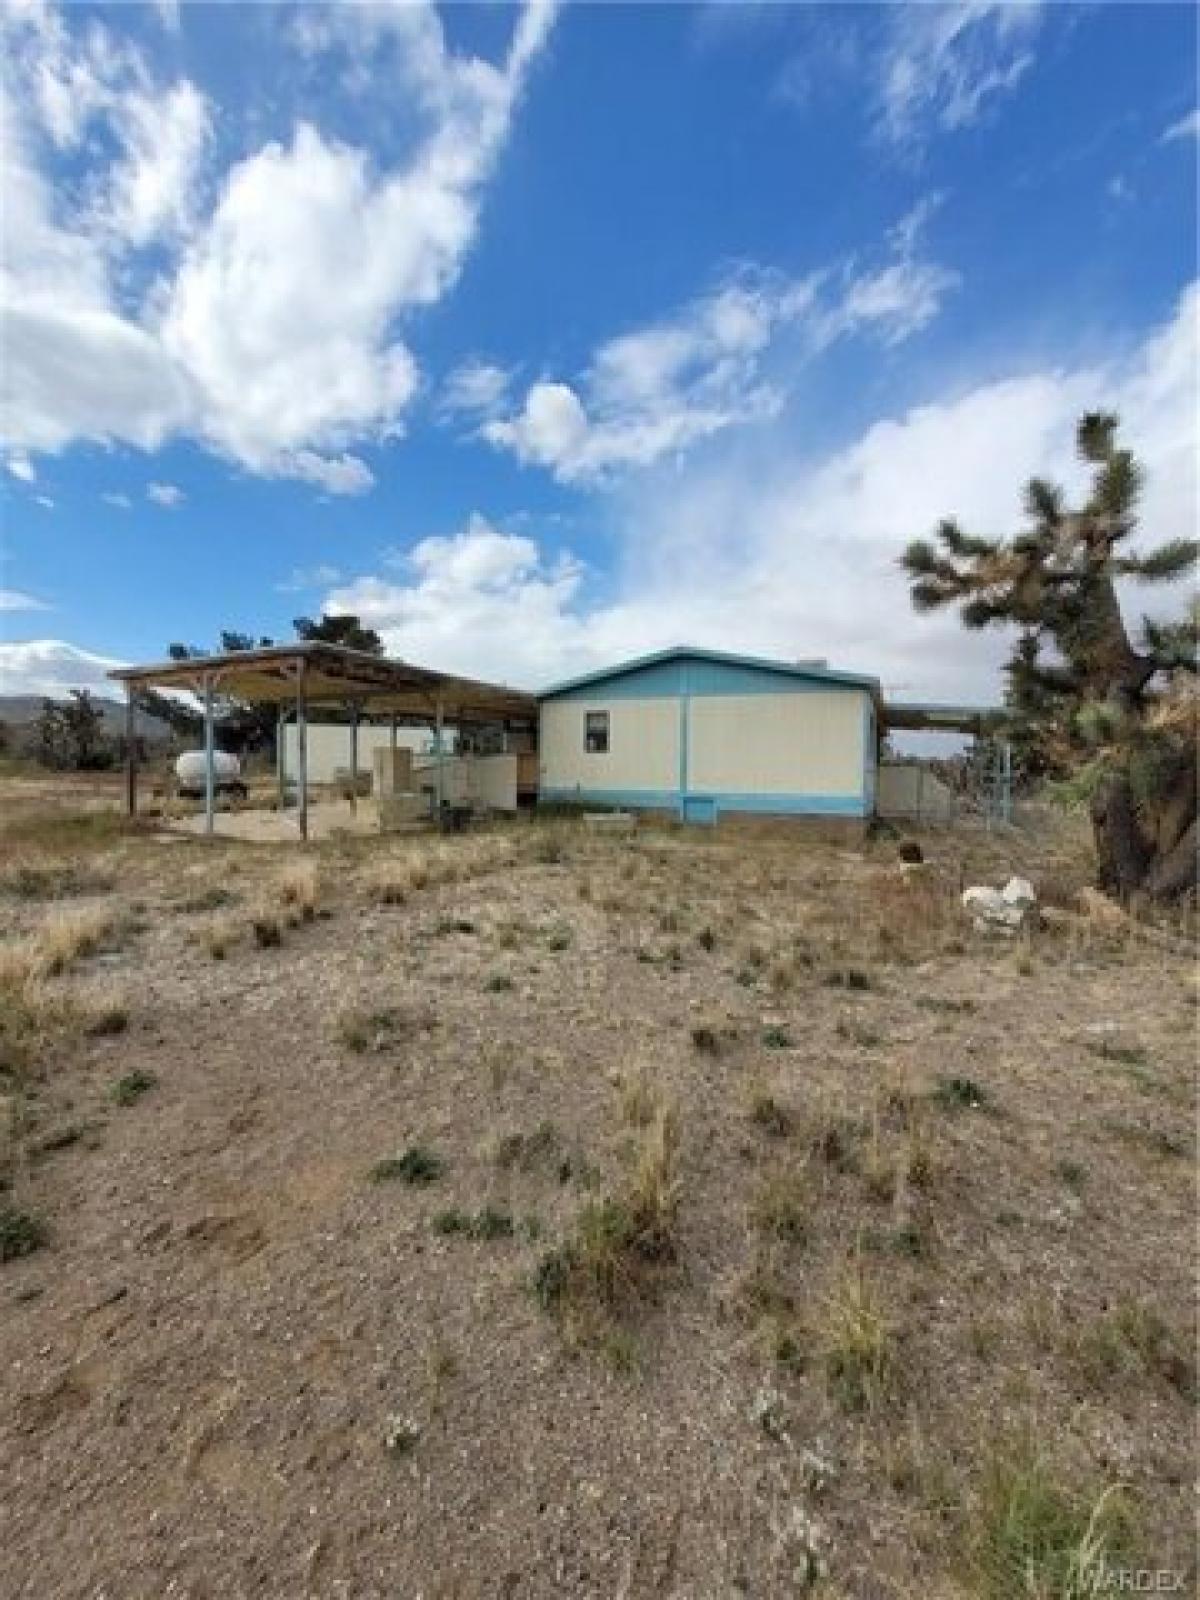 Picture of Home For Sale in Dolan Springs, Arizona, United States